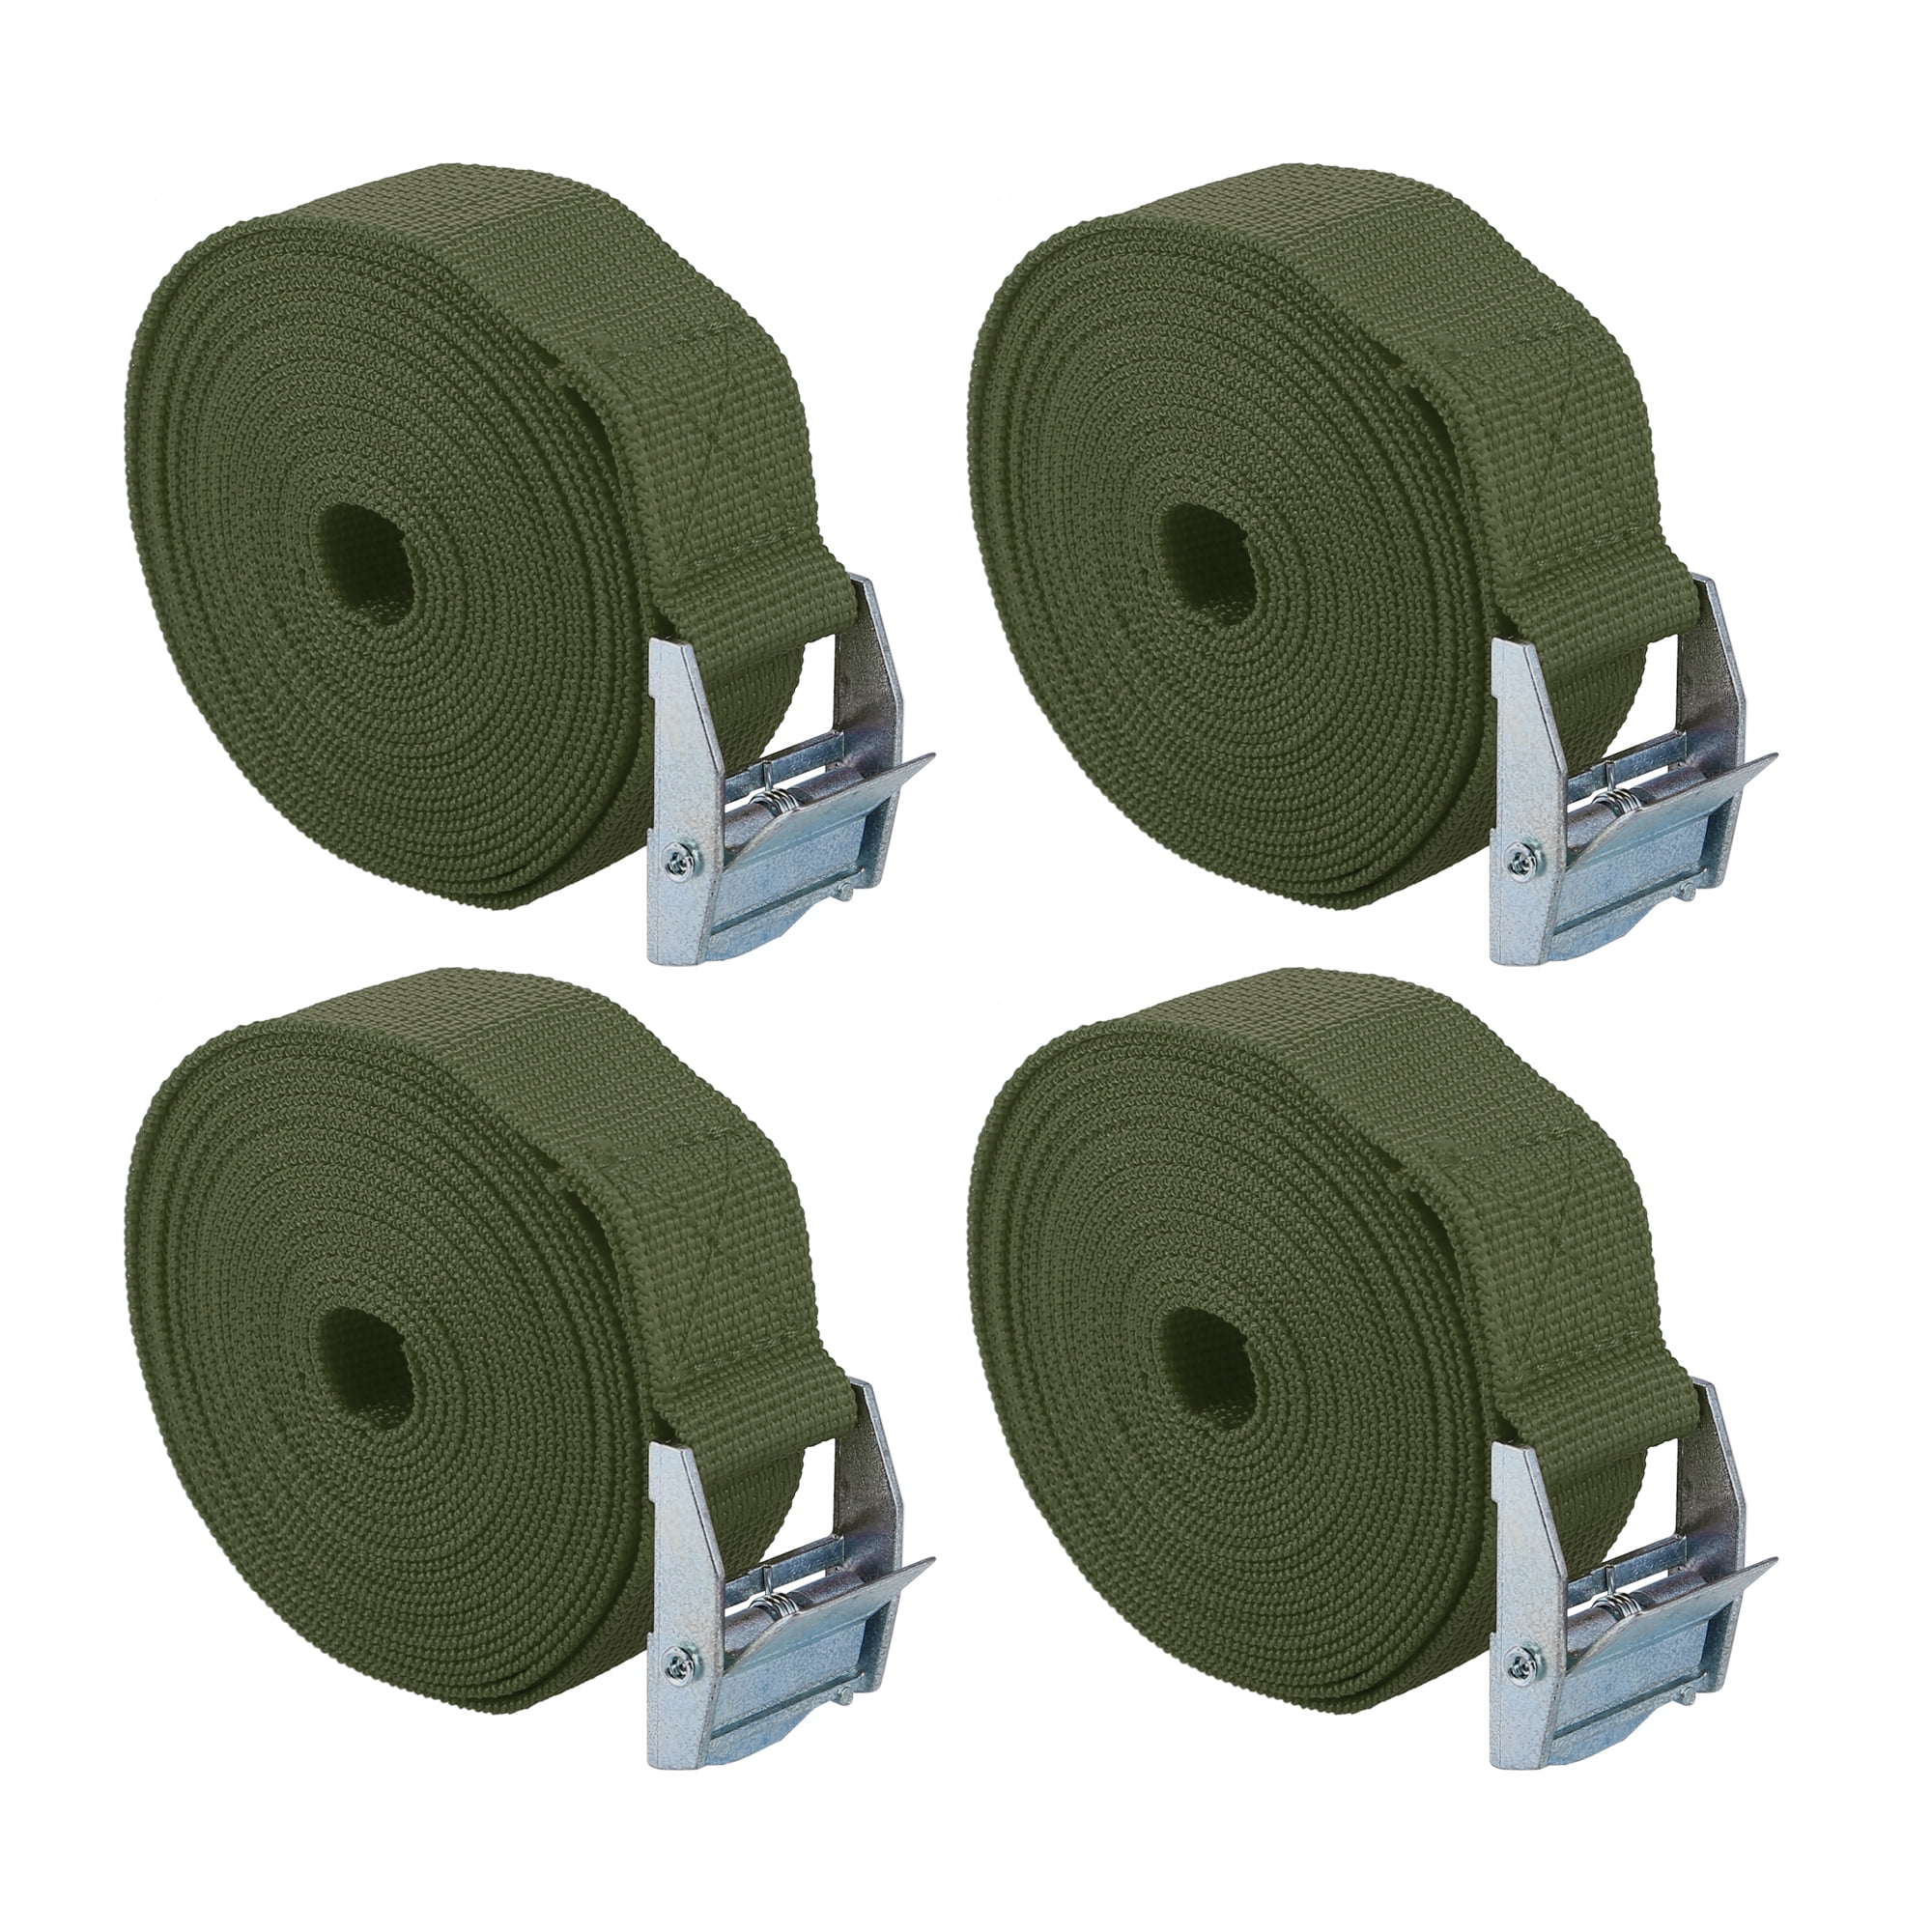 XSTRAP Cam Buckle Straps 6pk 8ft Powersports Tie-Downs 1-Inch Green